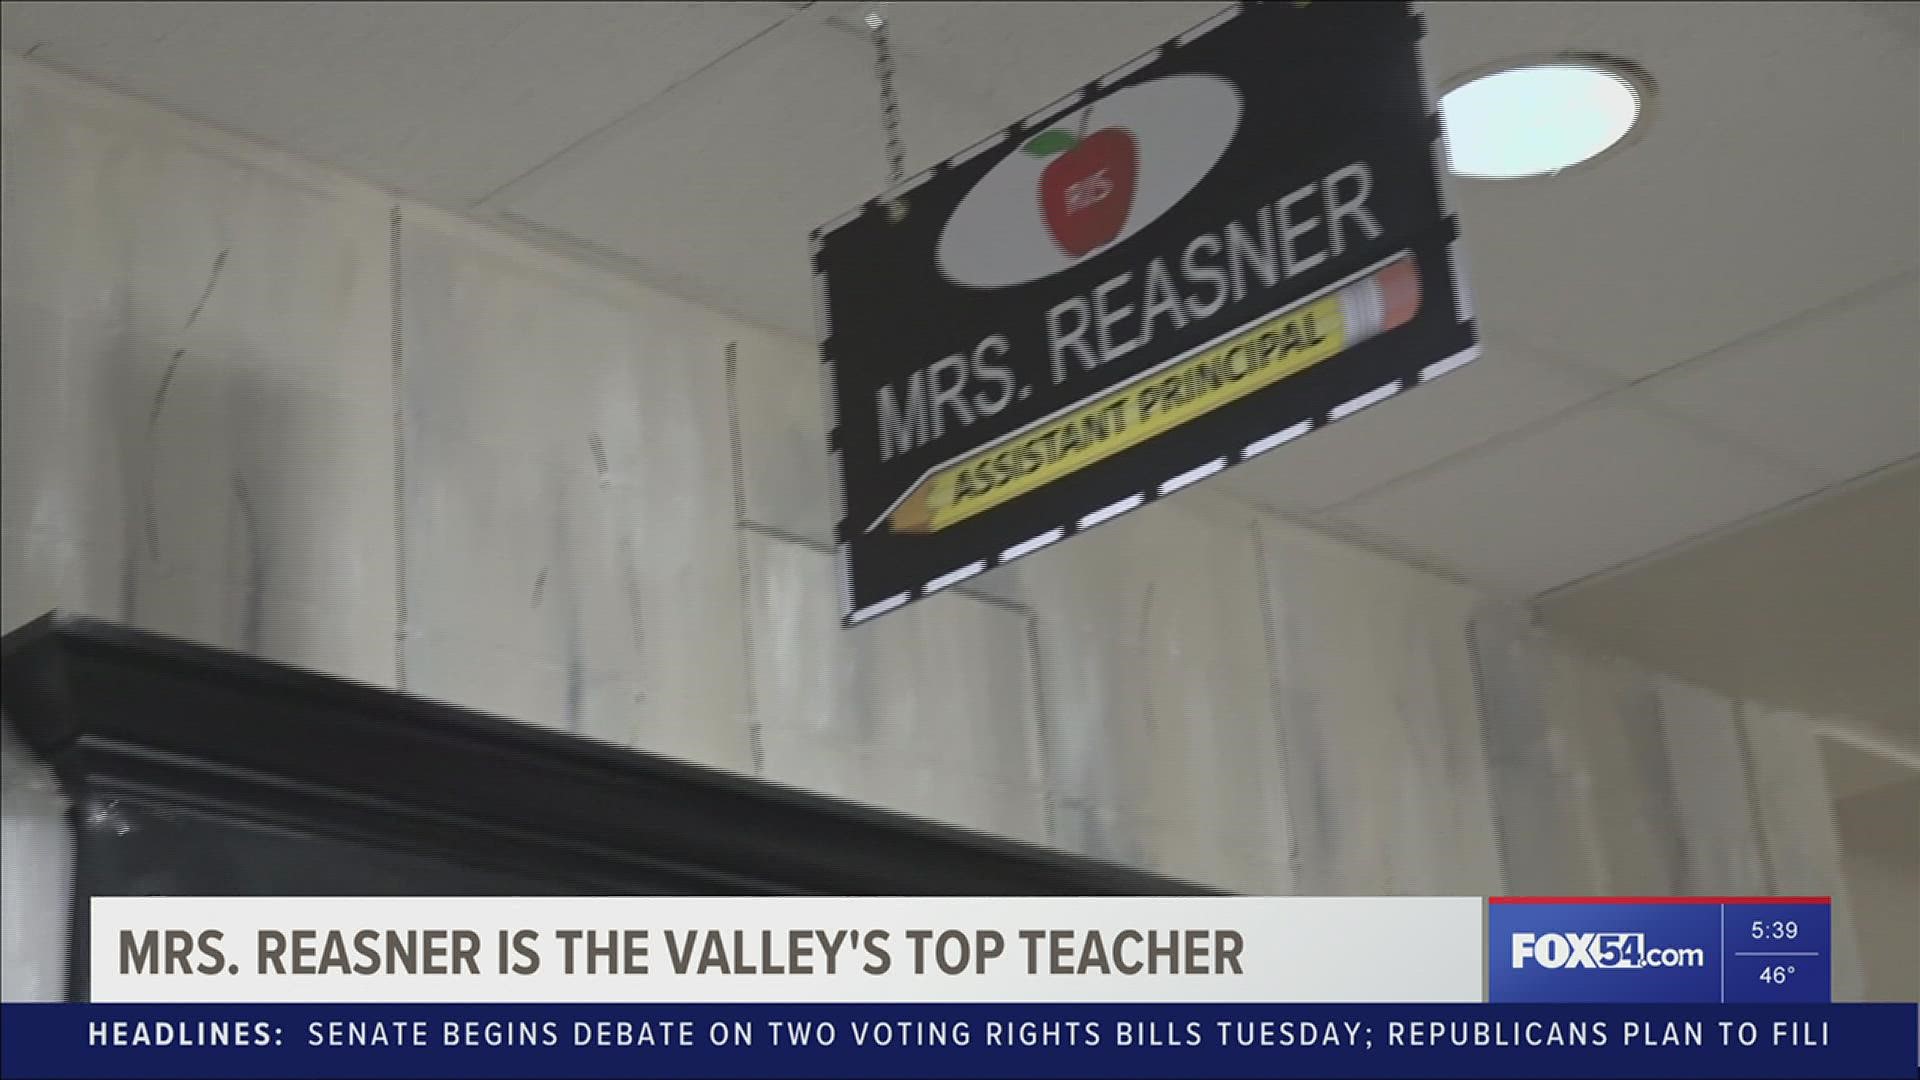 After a long classroom career, Mrs. Reasner is taking on a new role as assistant principal.